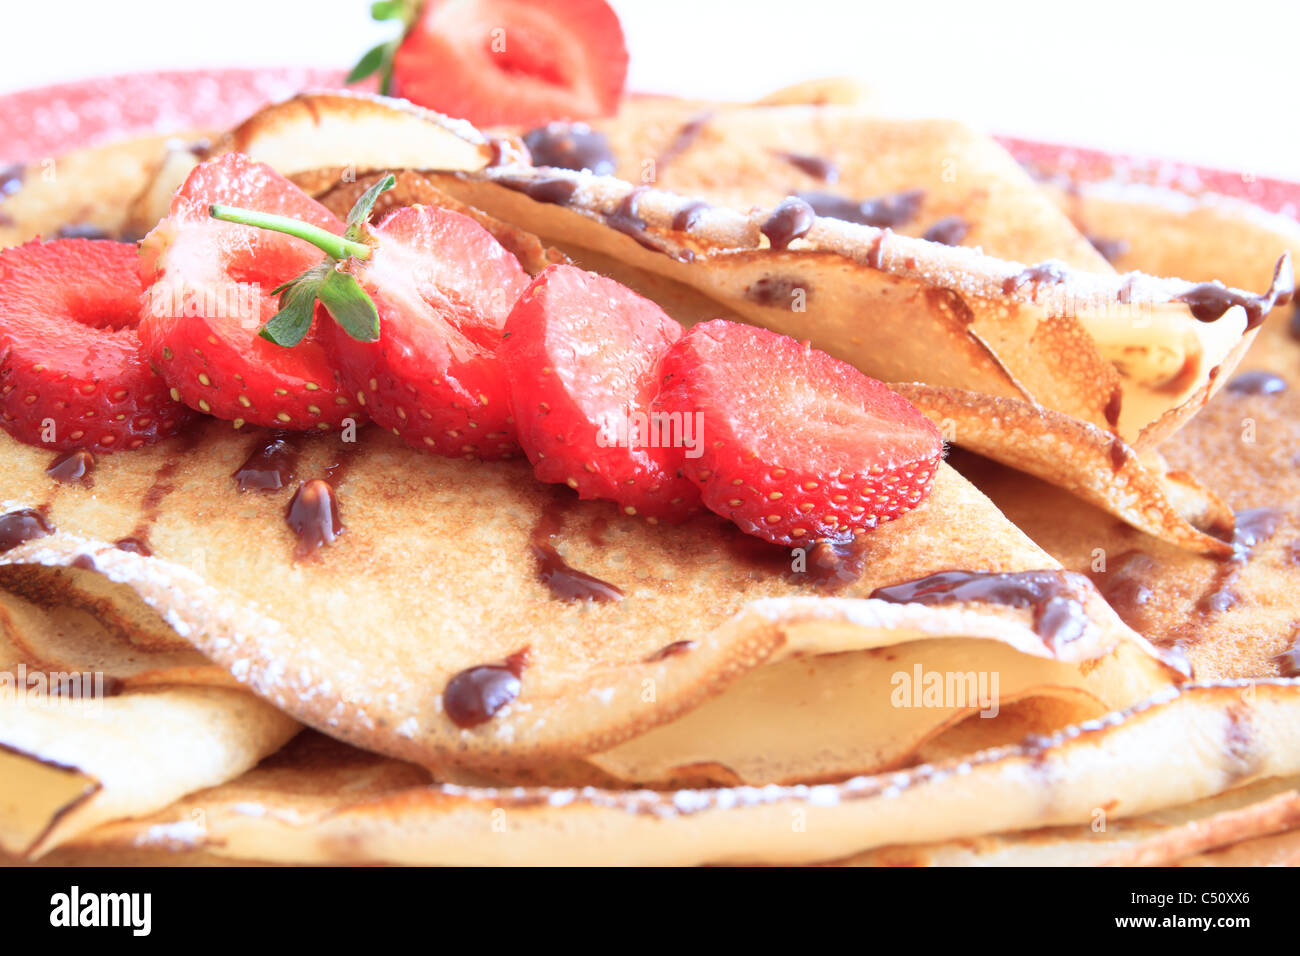 pancakes with strawberries on red plate Stock Photo